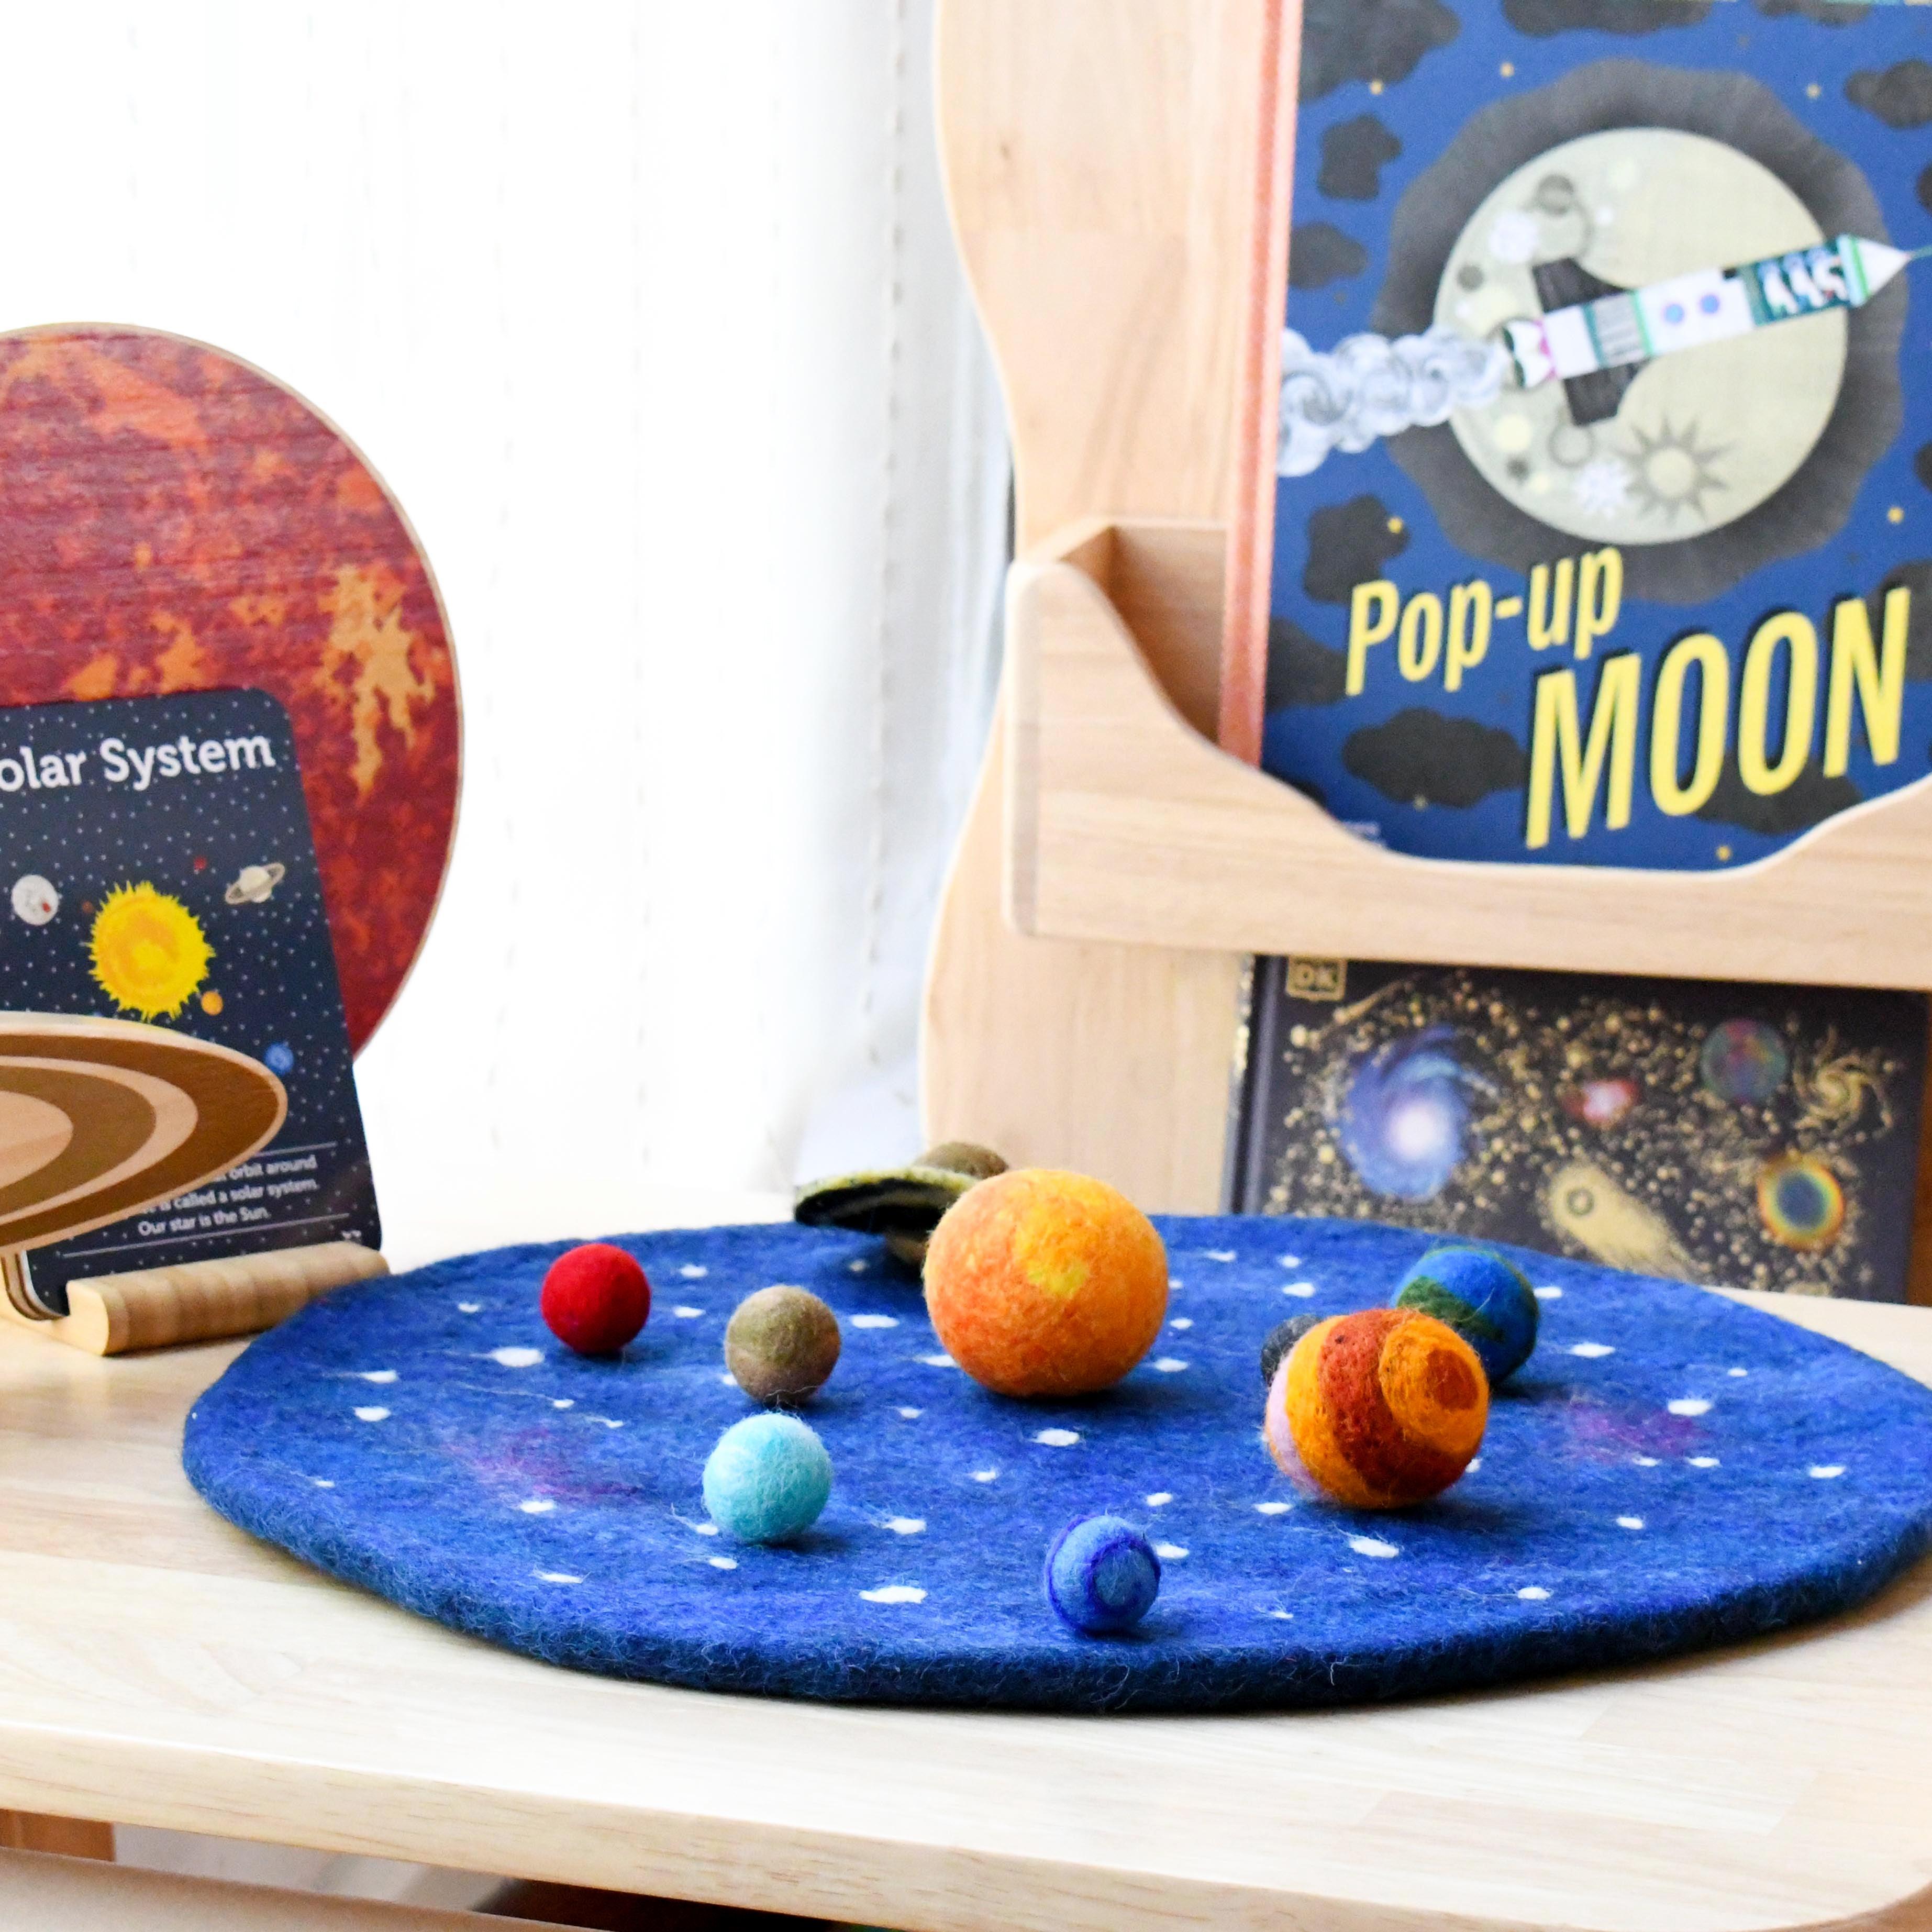 Outer Space and Solar System Theme - Tara Treasures